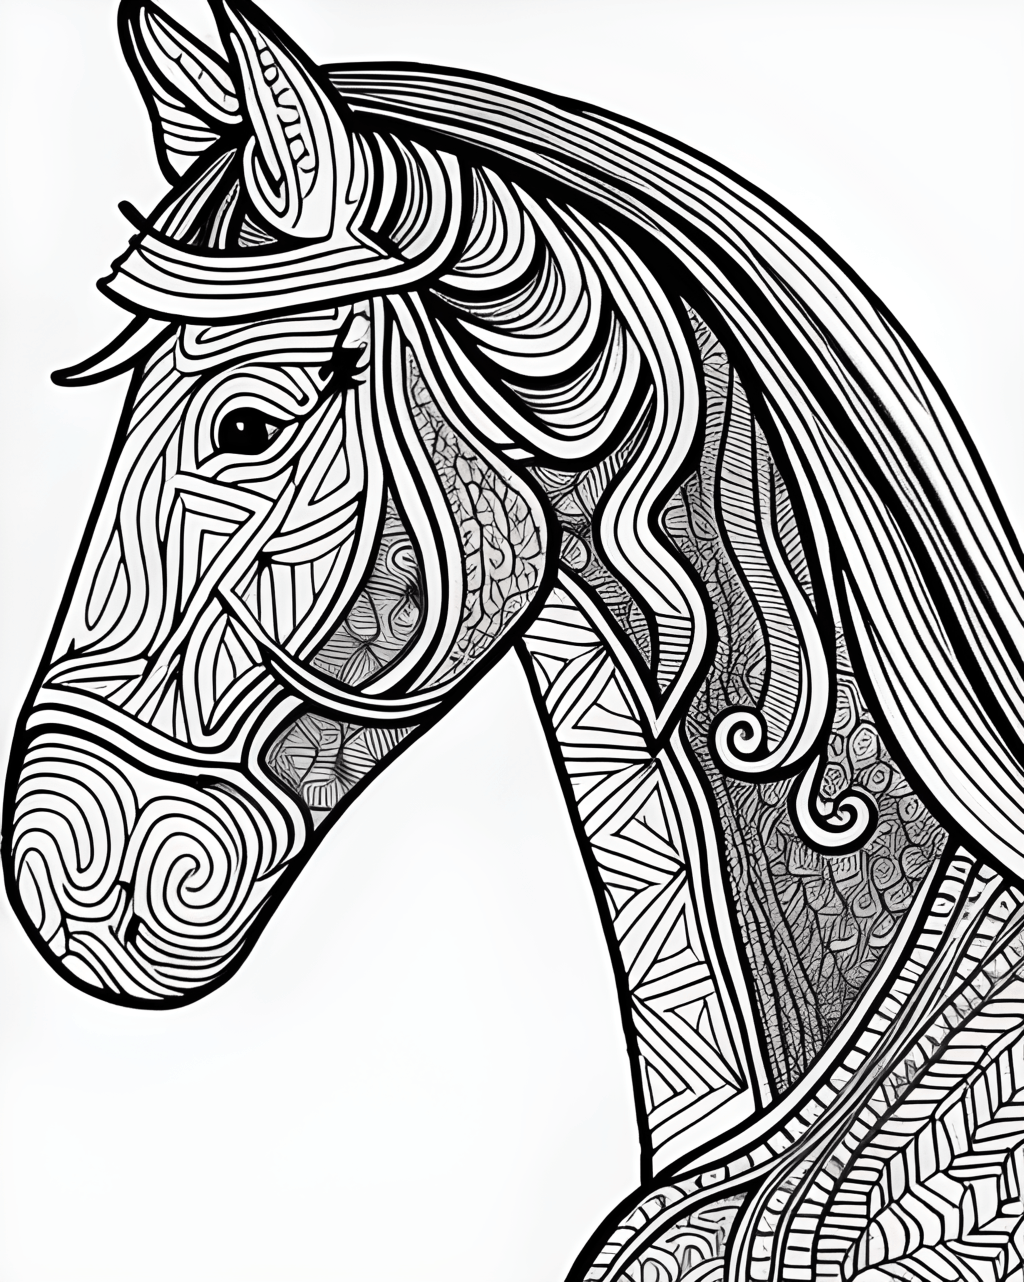 Horse Coloring Page Wonderful World of Horses · Creative Fabrica